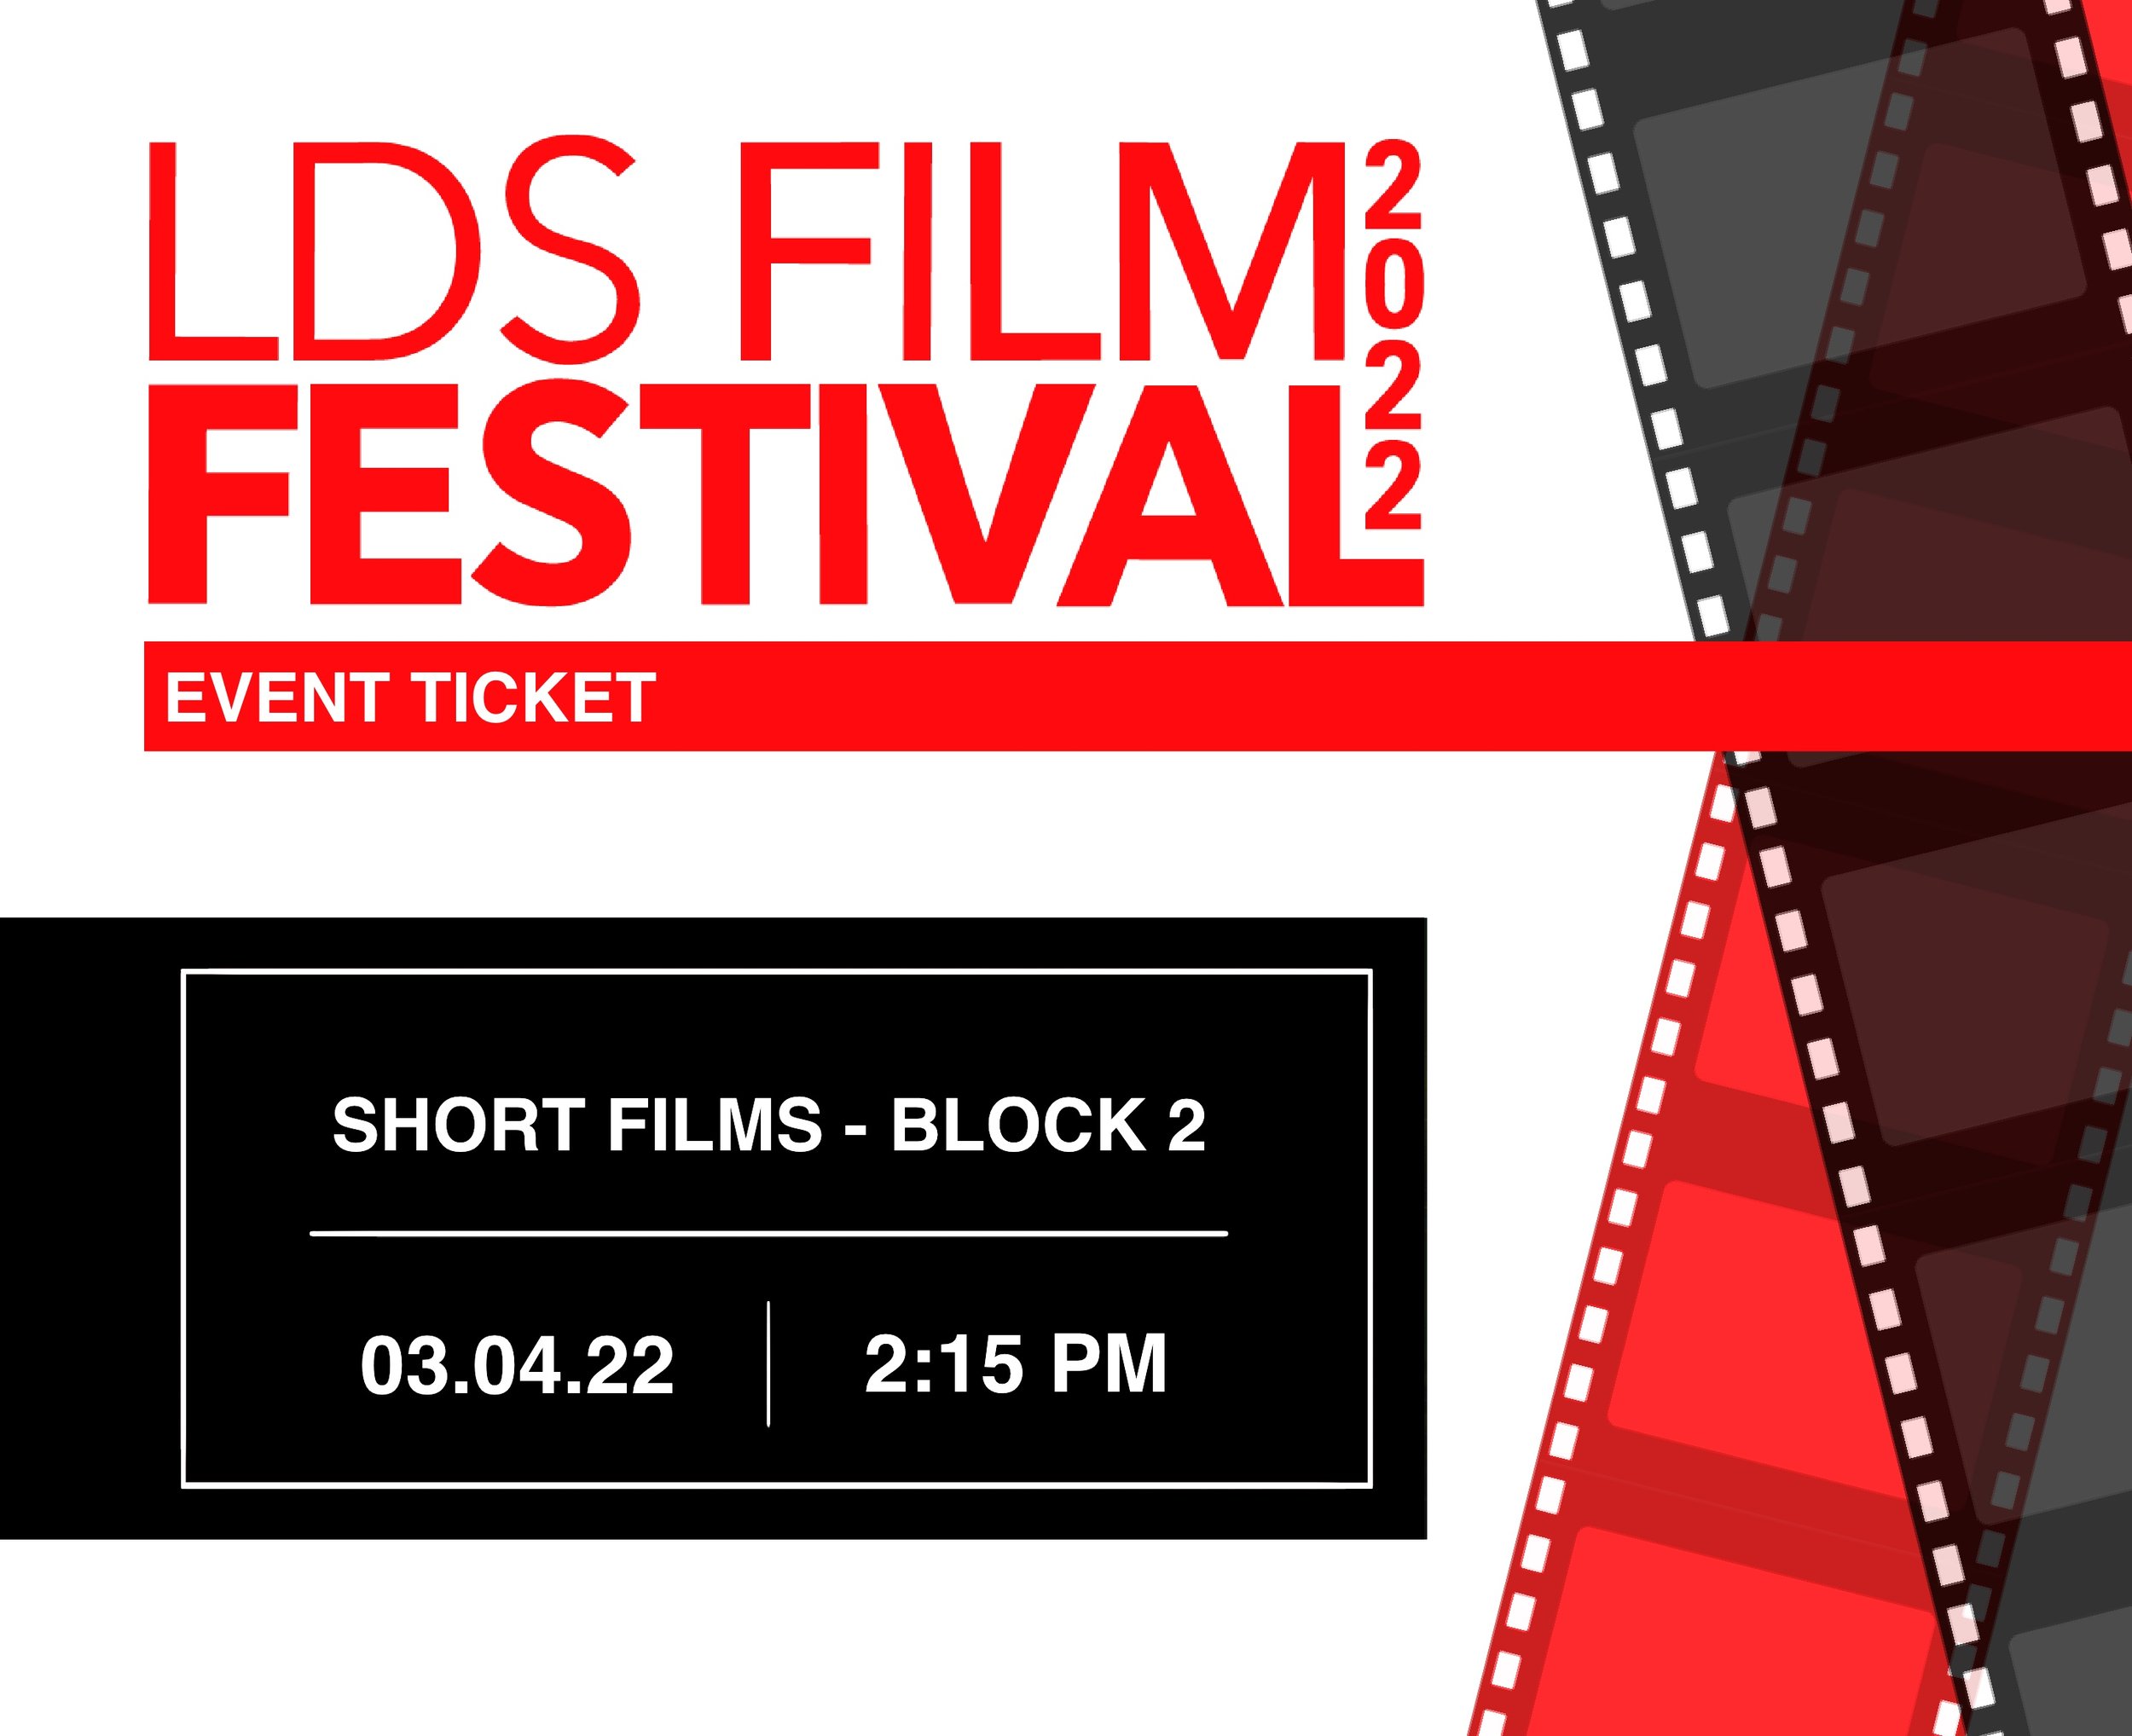 SHORT FILMS - Block 203.04.22 | 2:15 PM Clarke Grand Theatre - Block 2 Screenings Include: A Last HopeAll That MattersSticks and StonesFABLESwitchboardThe Man in the TreeThe Way They See UsQ&A with filmmakers